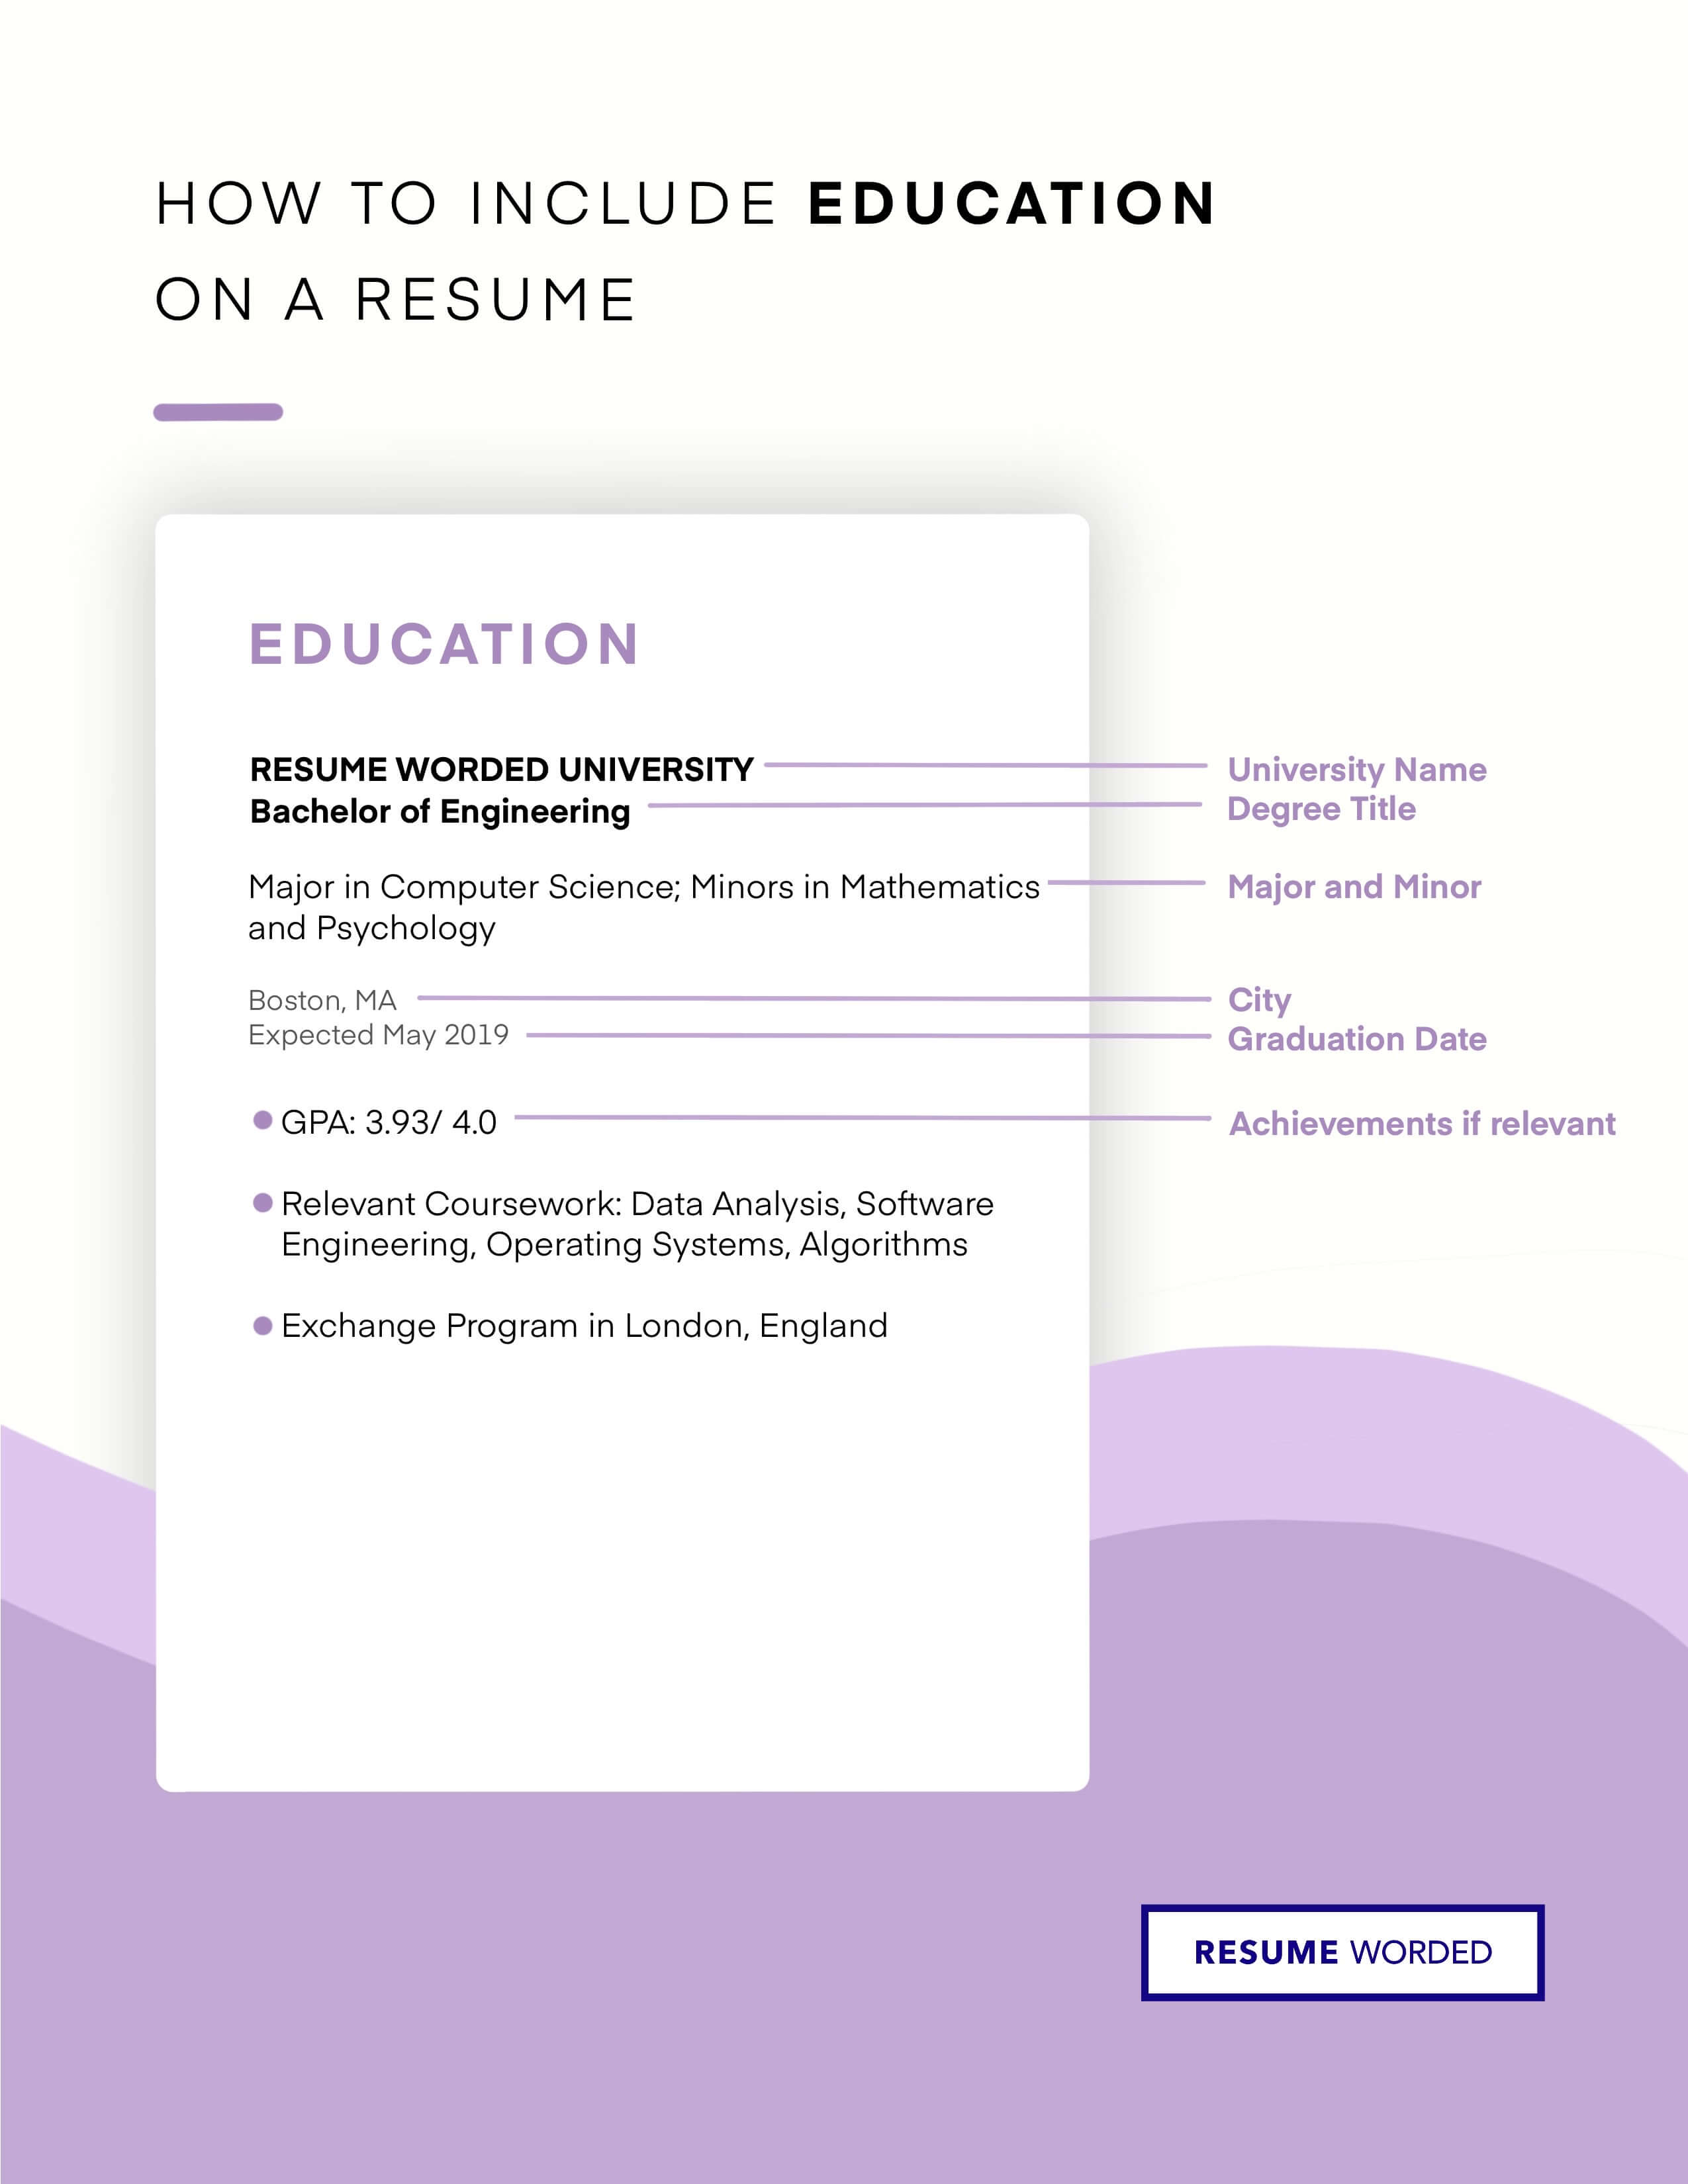 Prioritize your educational background. - Software Engineering Director Resume